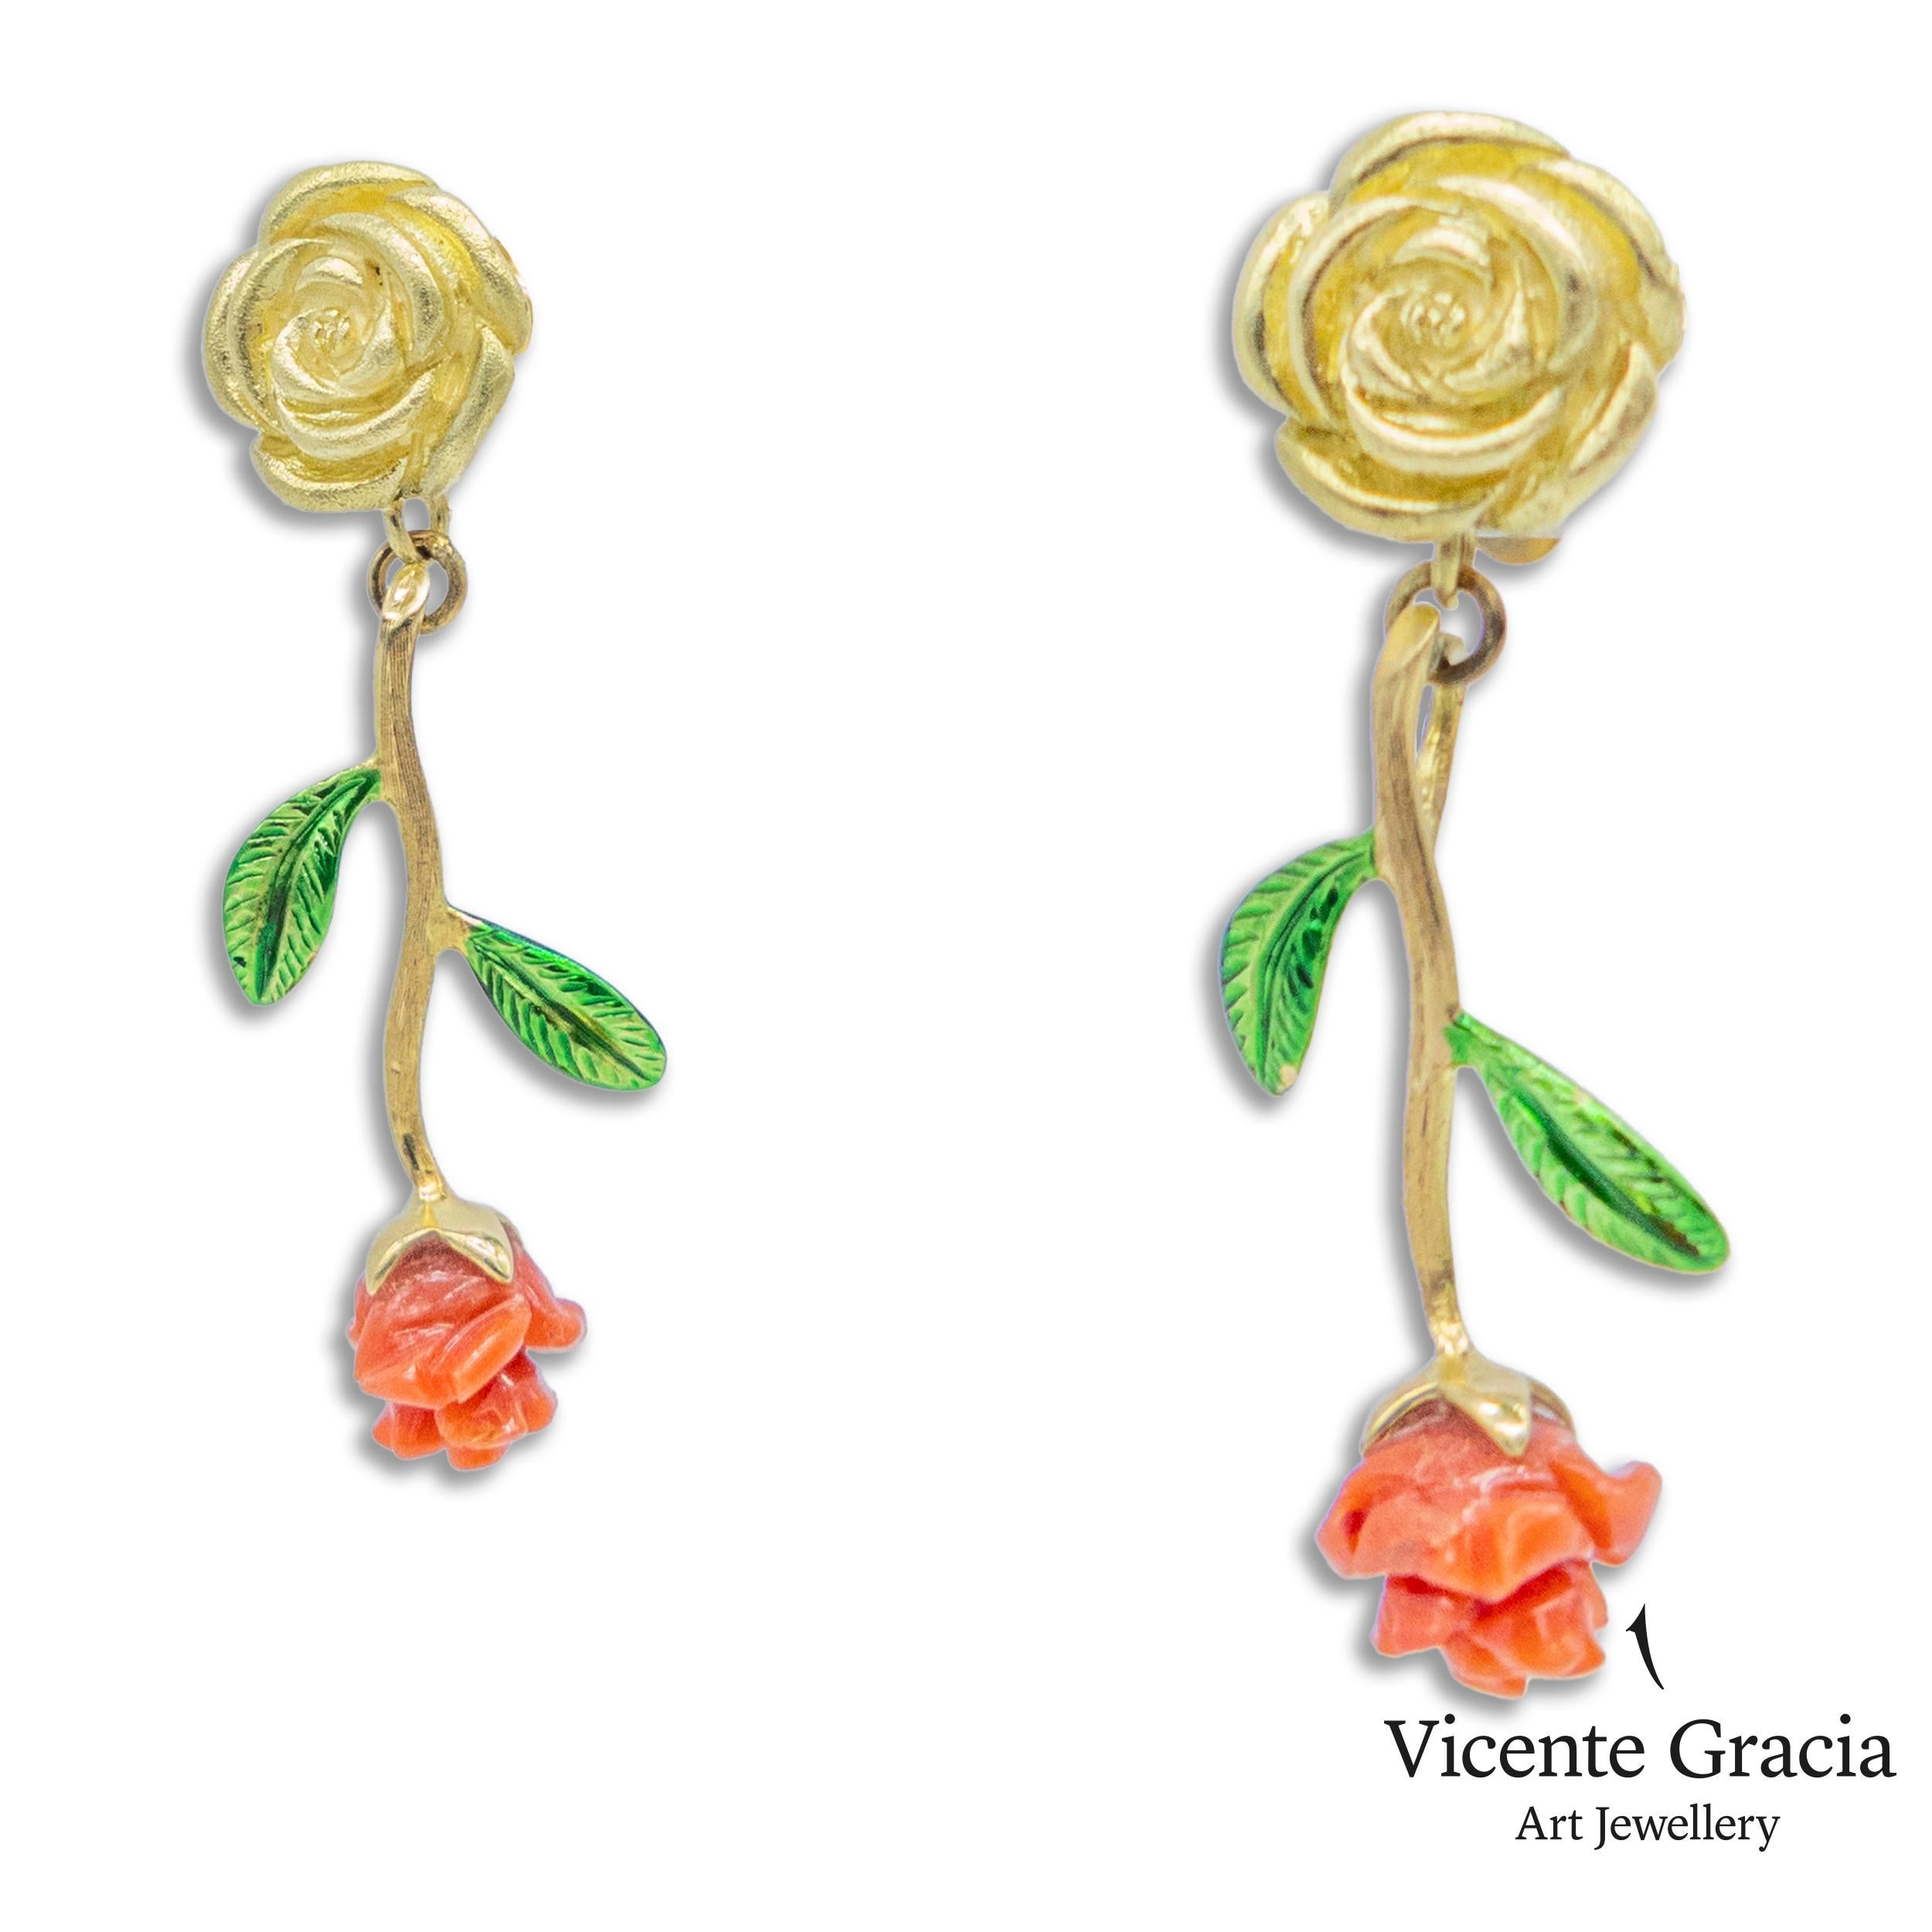 21st Century 18 Karat Yellow Gold Earrings Roses Red Coral Leafs Enamel

Earrings made of 18 Karat yellow gold, carved red coral in the shape of a rose and cold enamel.

The Roses earrings, very recurrent in our work in representation of love